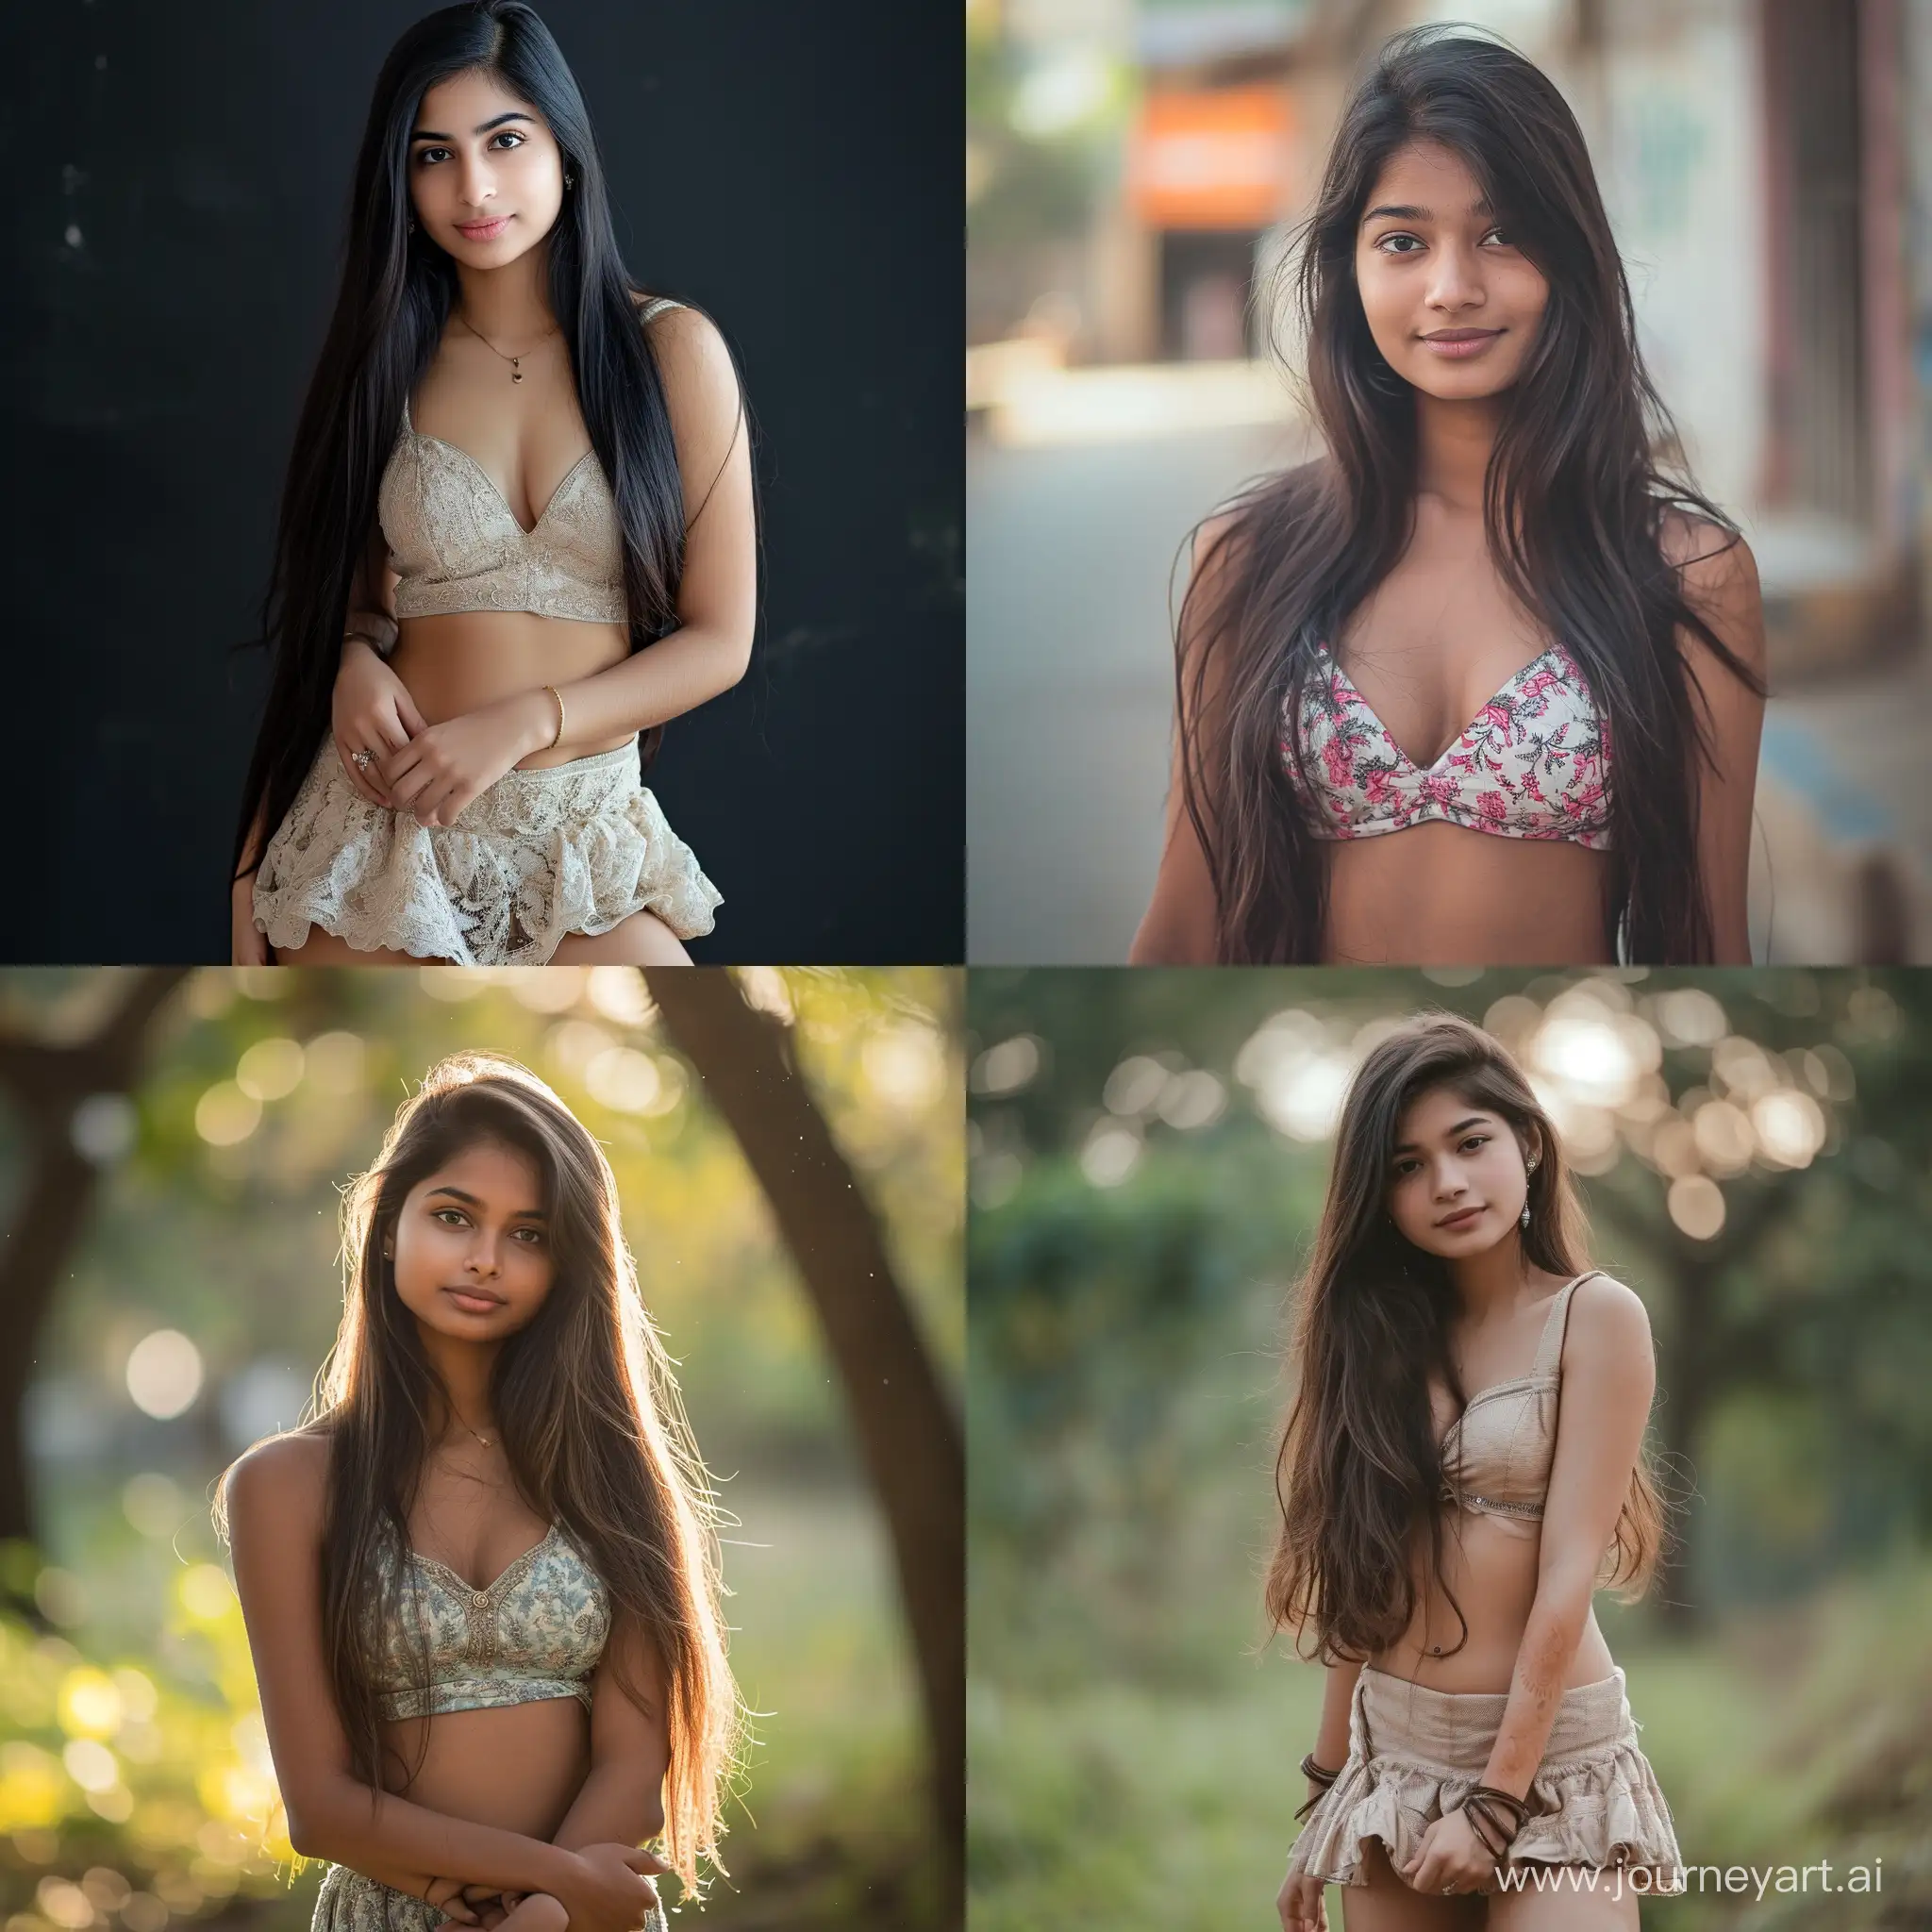 Elegant-Indian-Woman-in-Short-Dress-Fashionable-21YearOld-with-PearShaped-Body